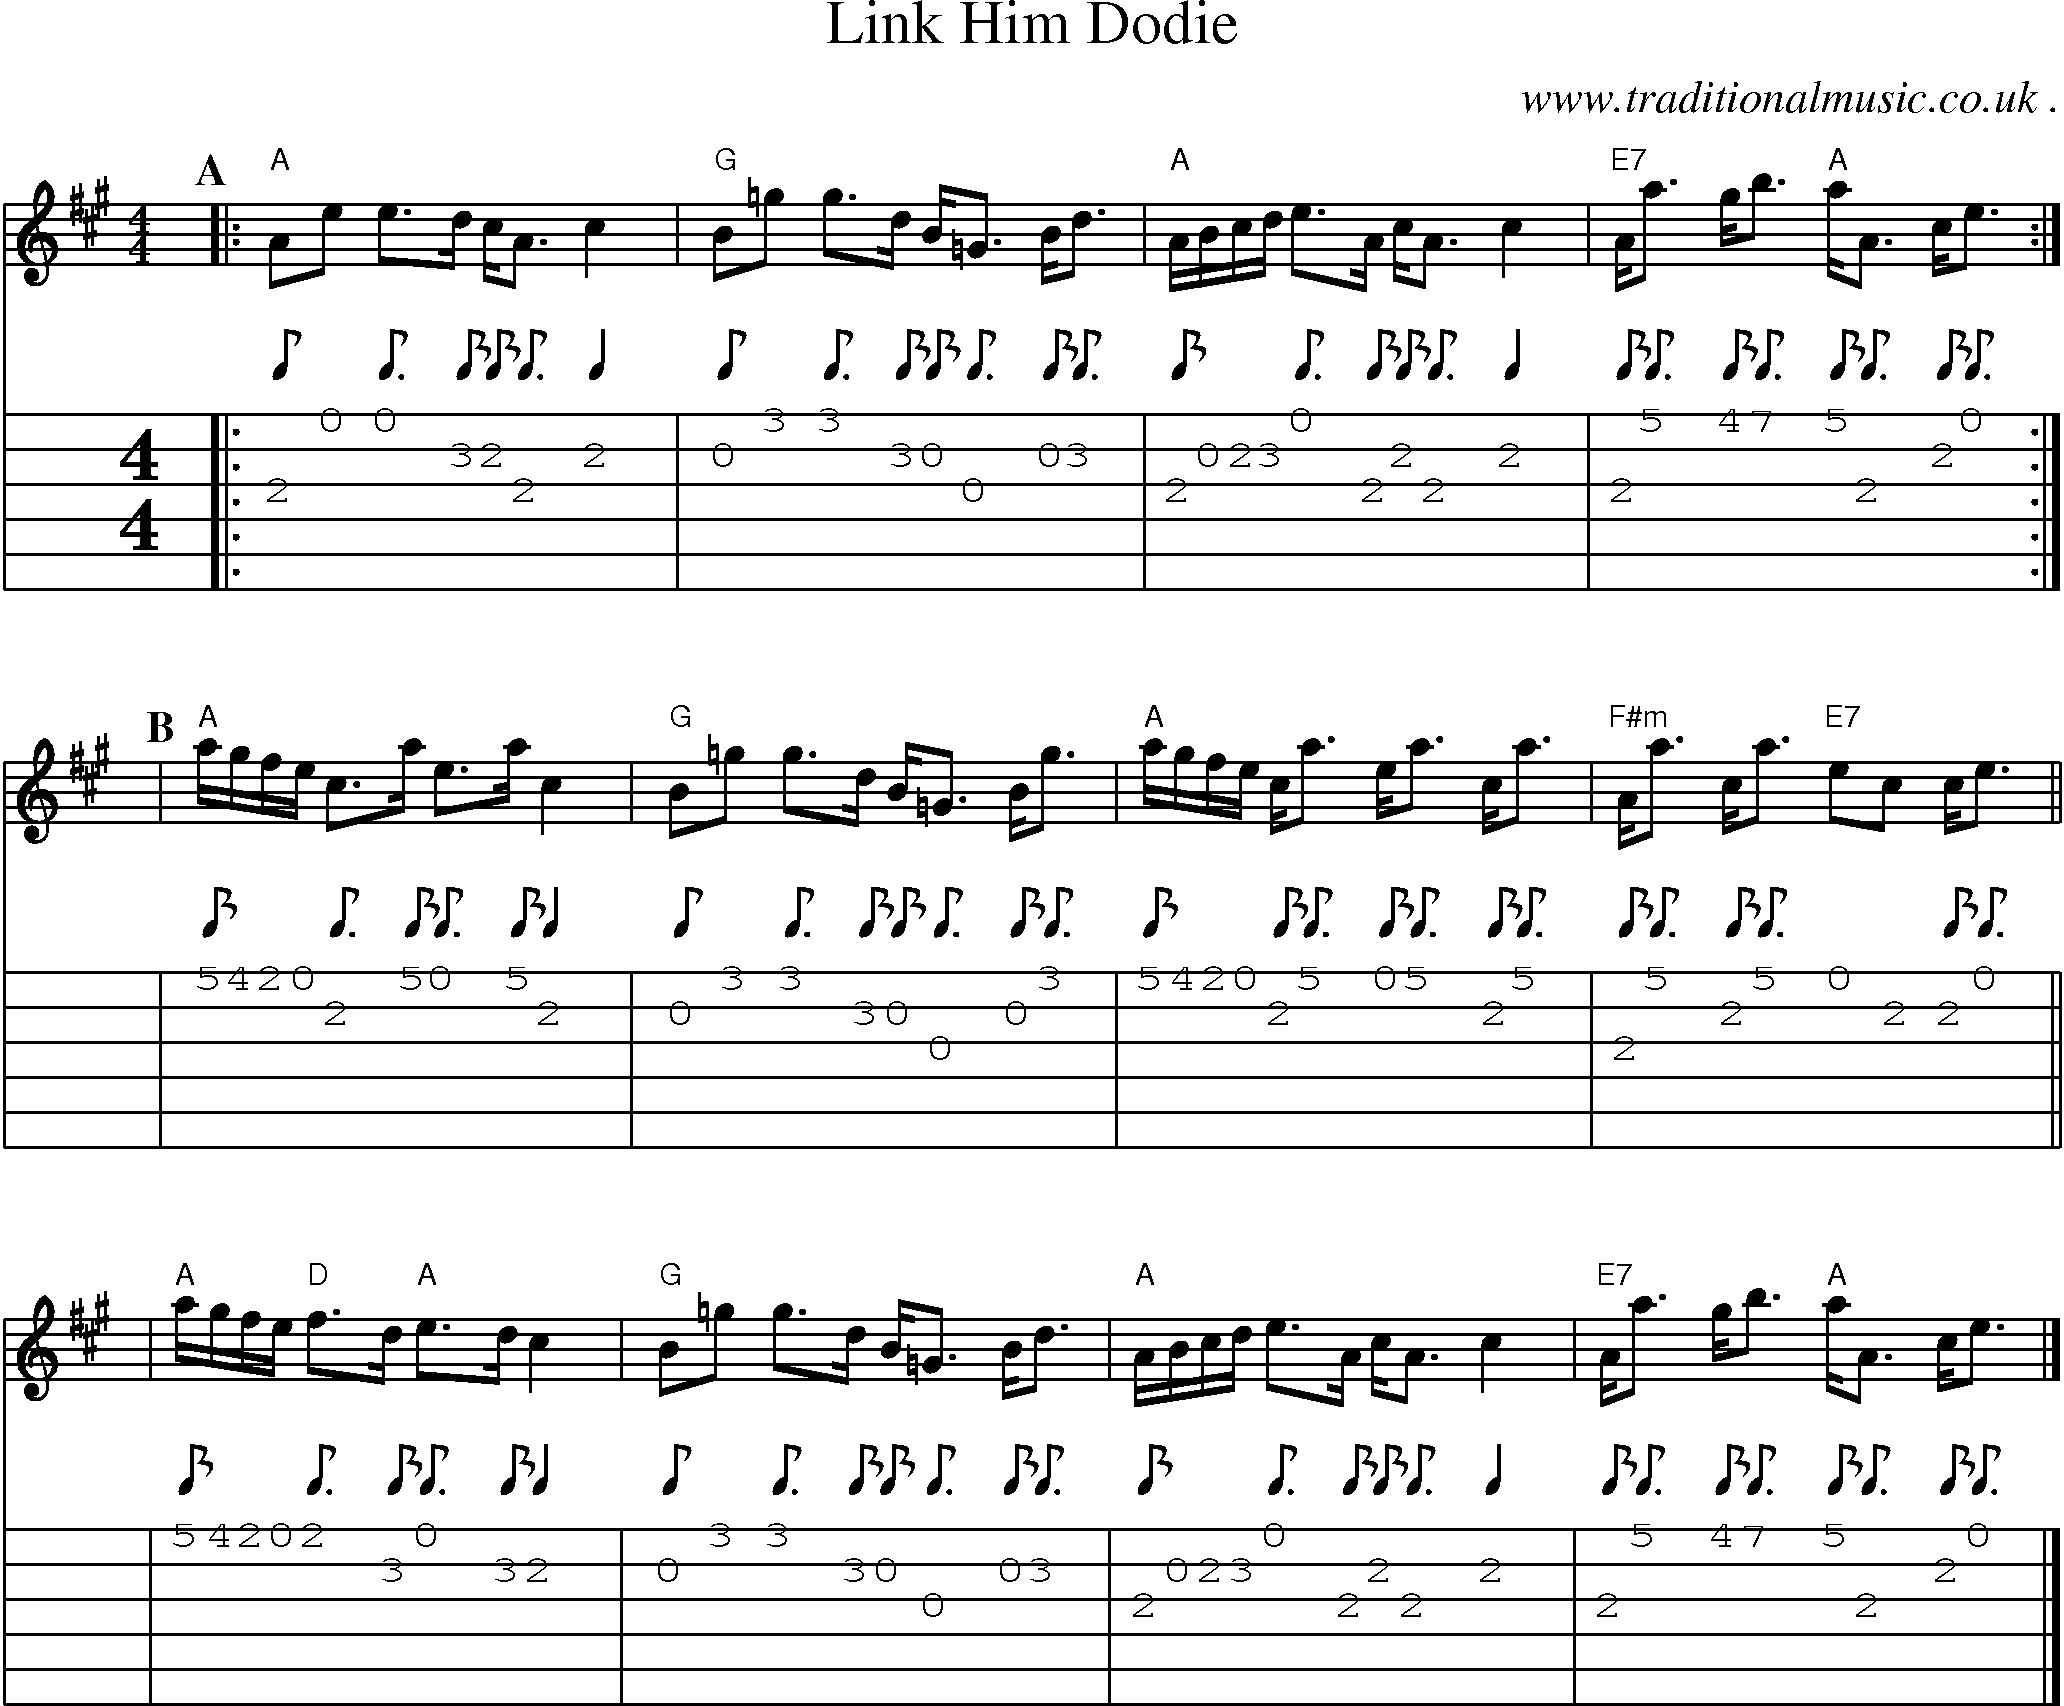 Sheet-music  score, Chords and Guitar Tabs for Link Him Dodie